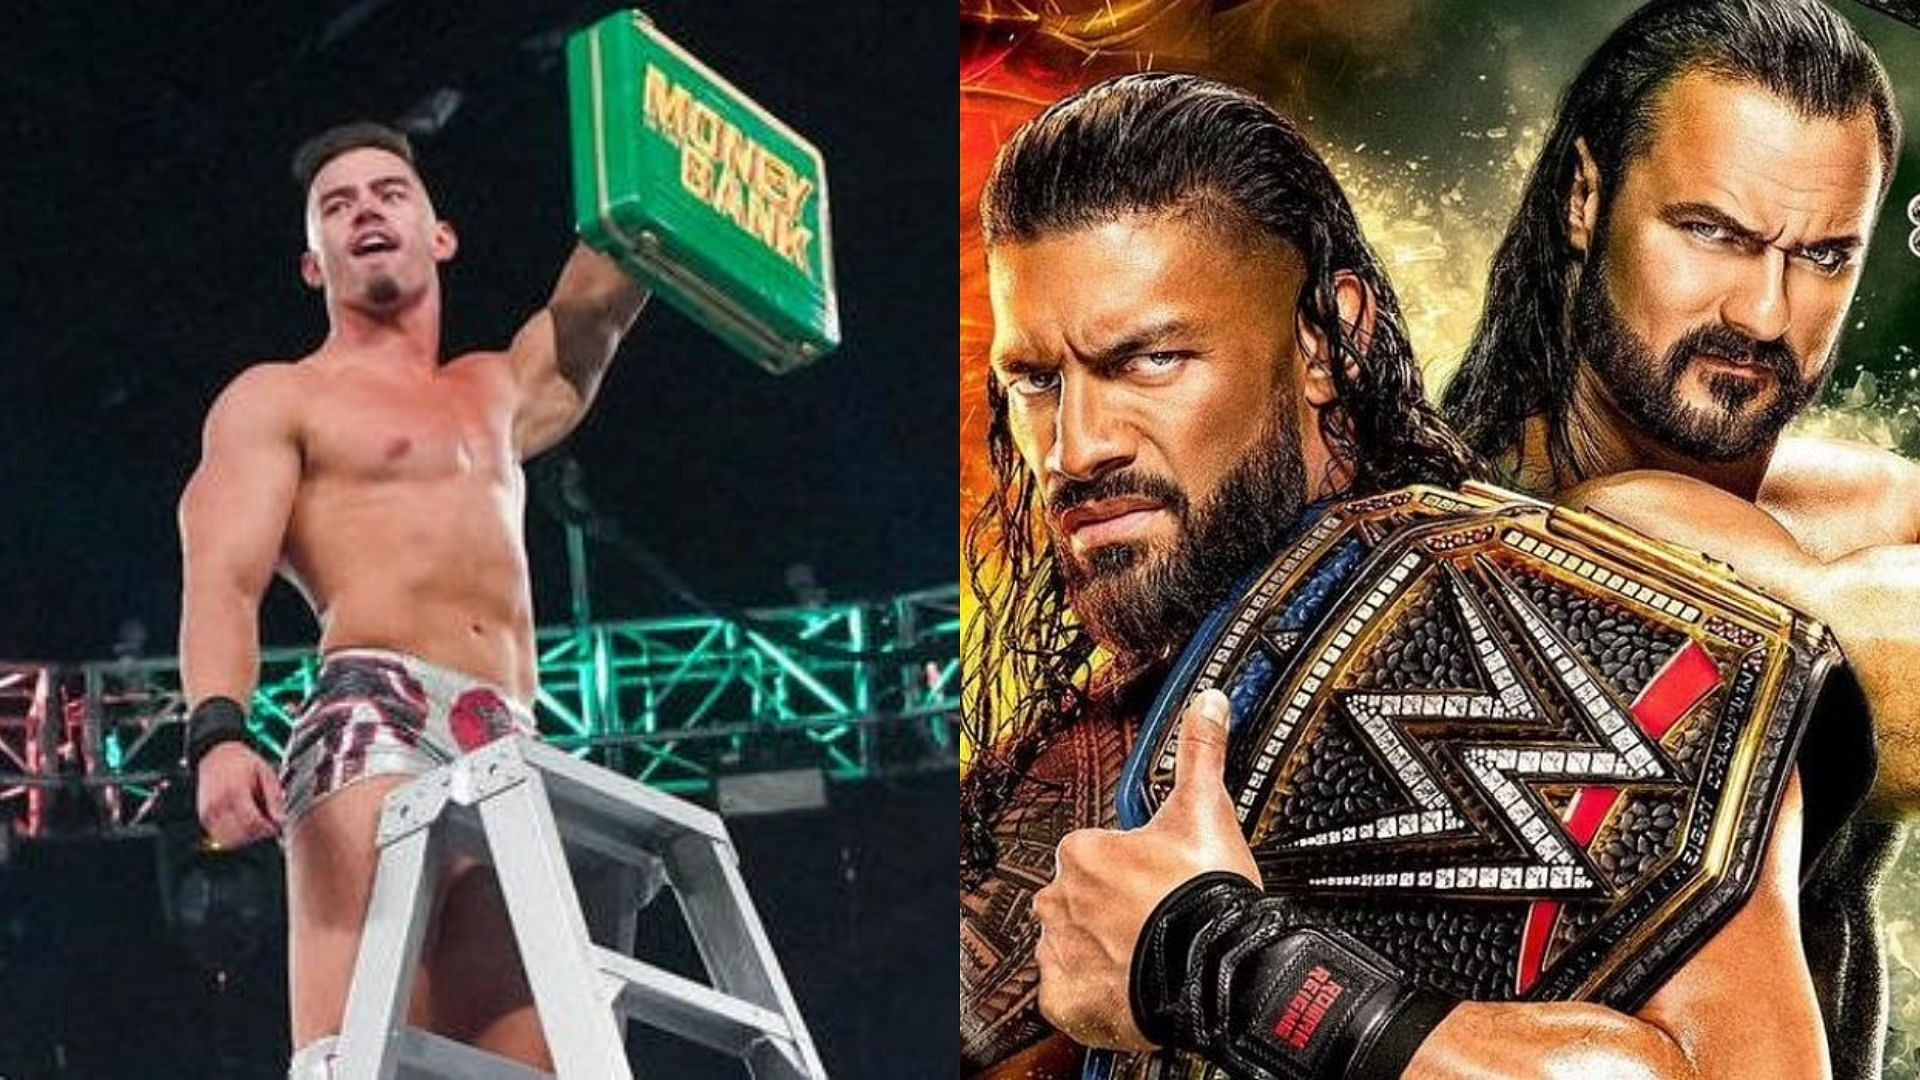 Theory could cash in on Reigns or McIntyre